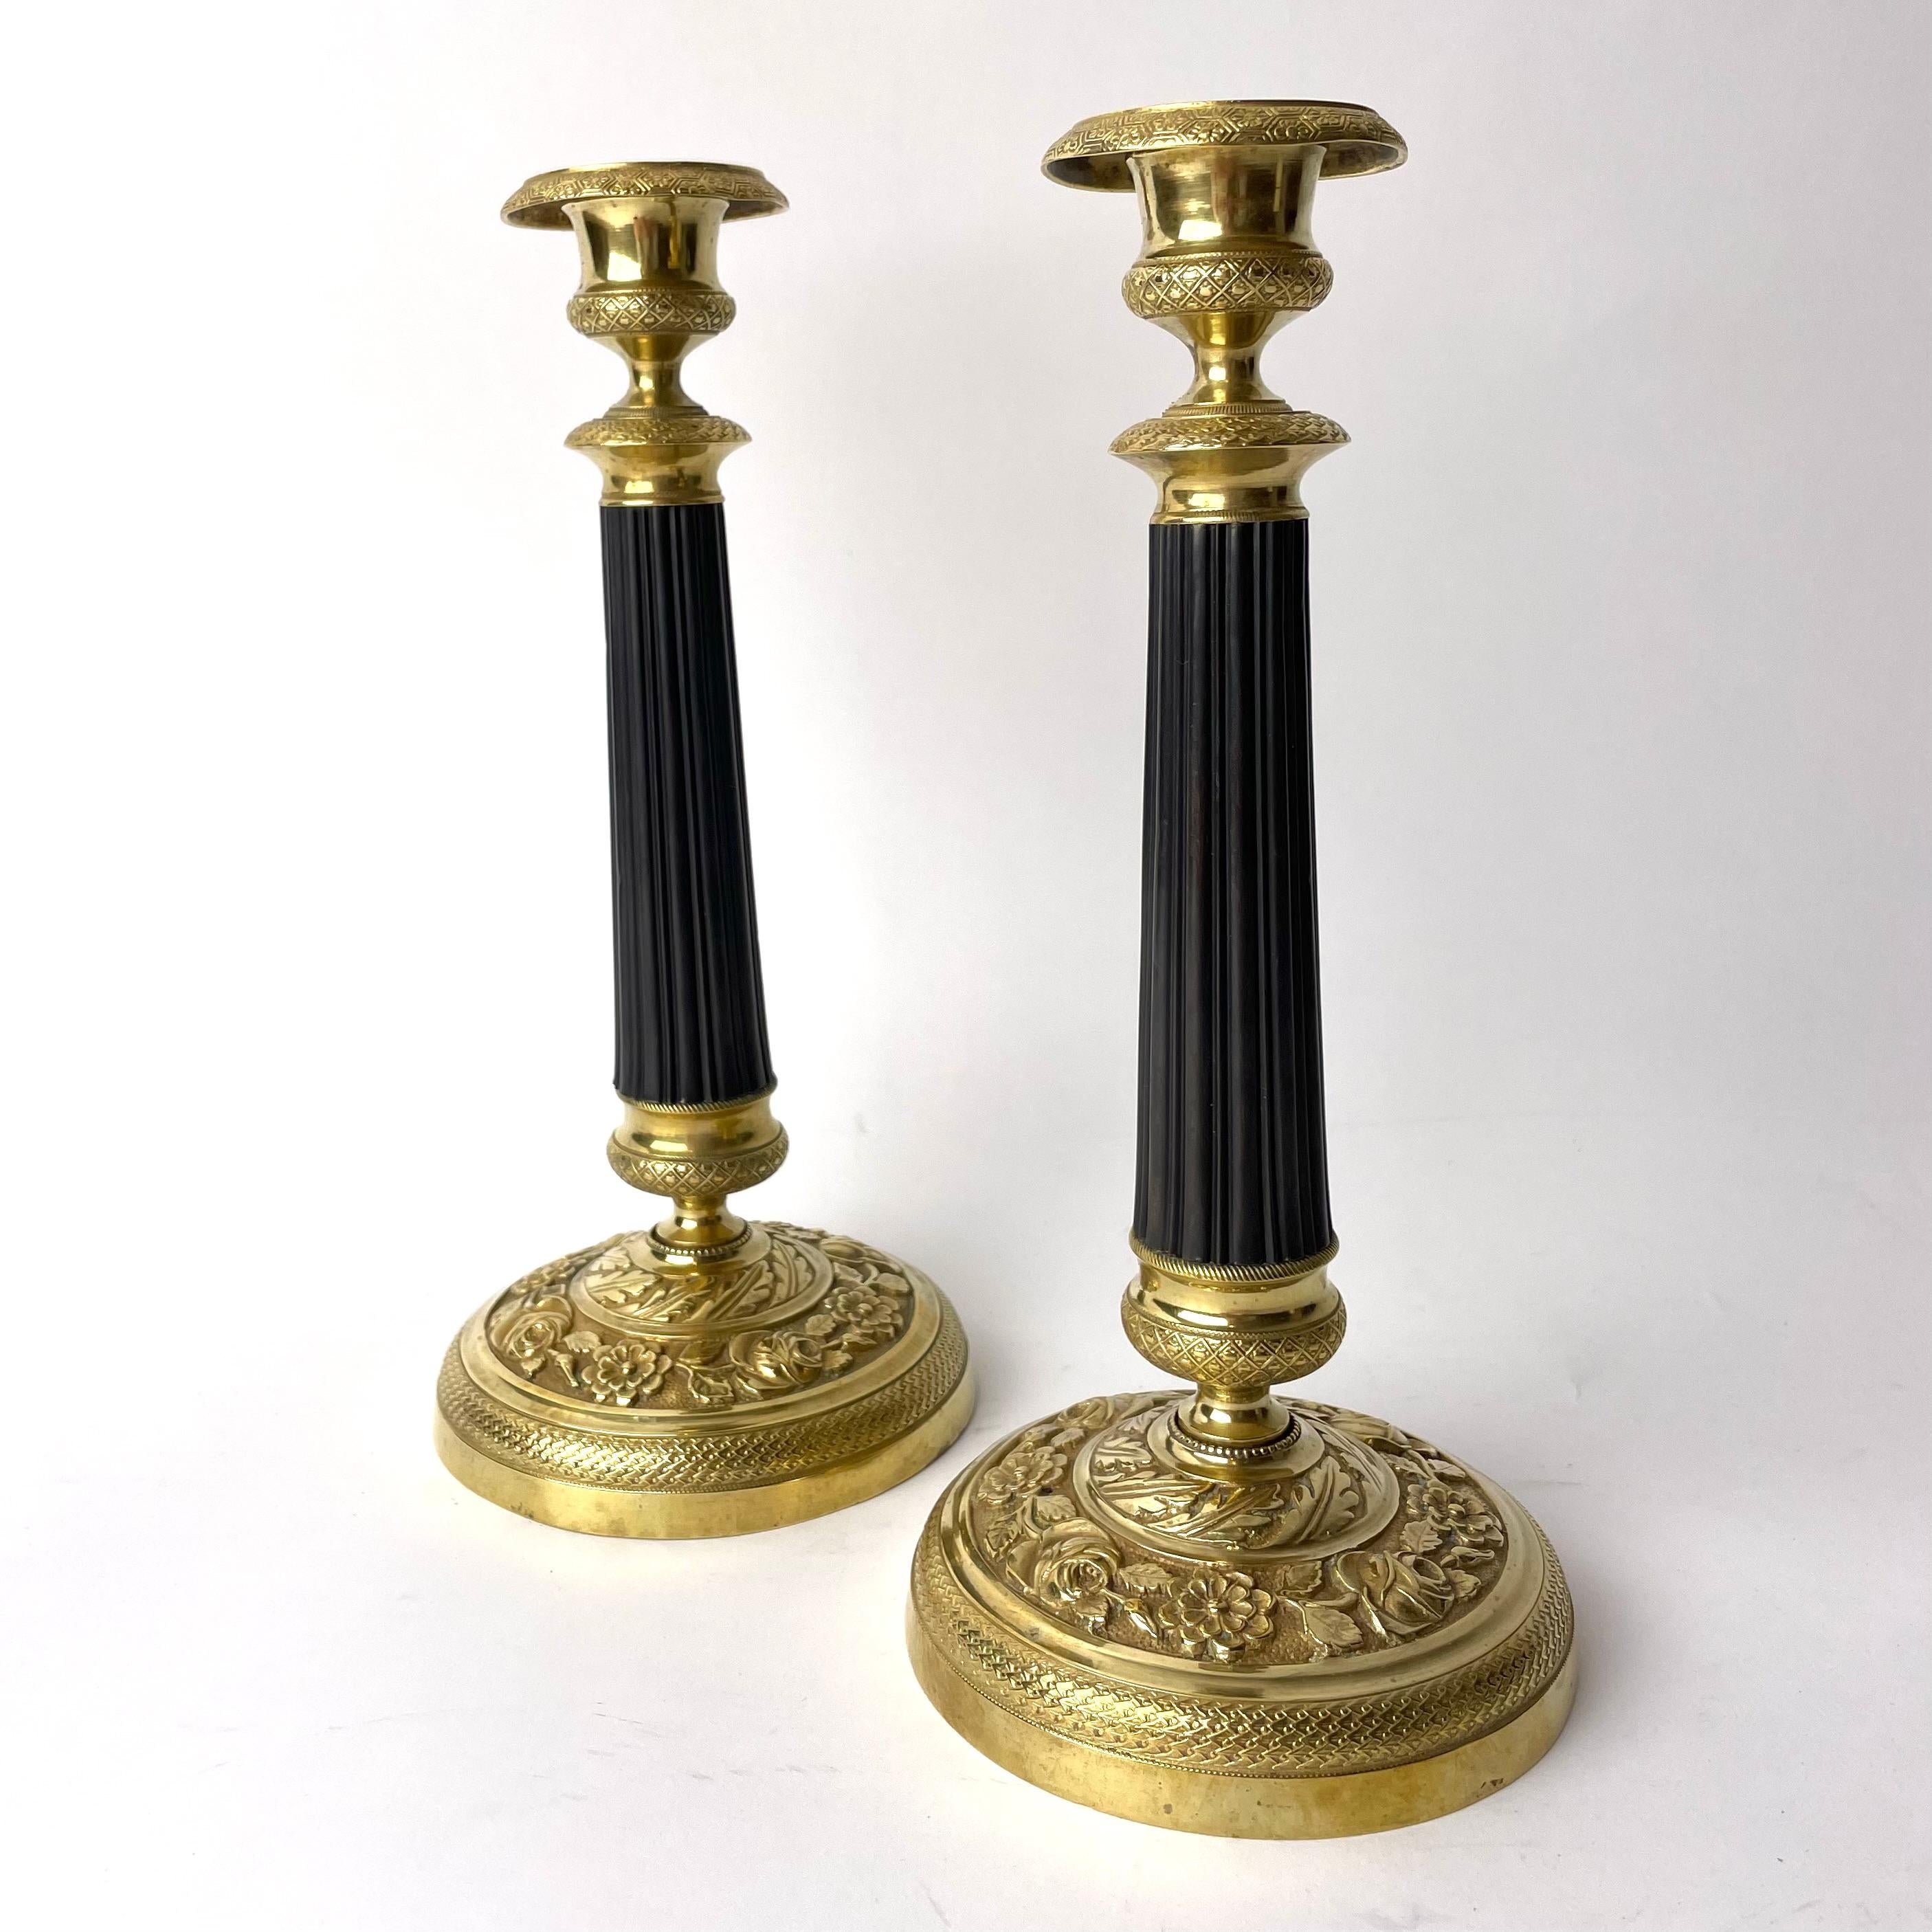 A pair of exquisite Empire candlesticks which combine gilt and patinated brass. Made in 1820s France. Various intricate rose, floral and leaf patterns adorn the bases in gilt brass. Emblematic of the Empire period, these candlesticks feature fluted